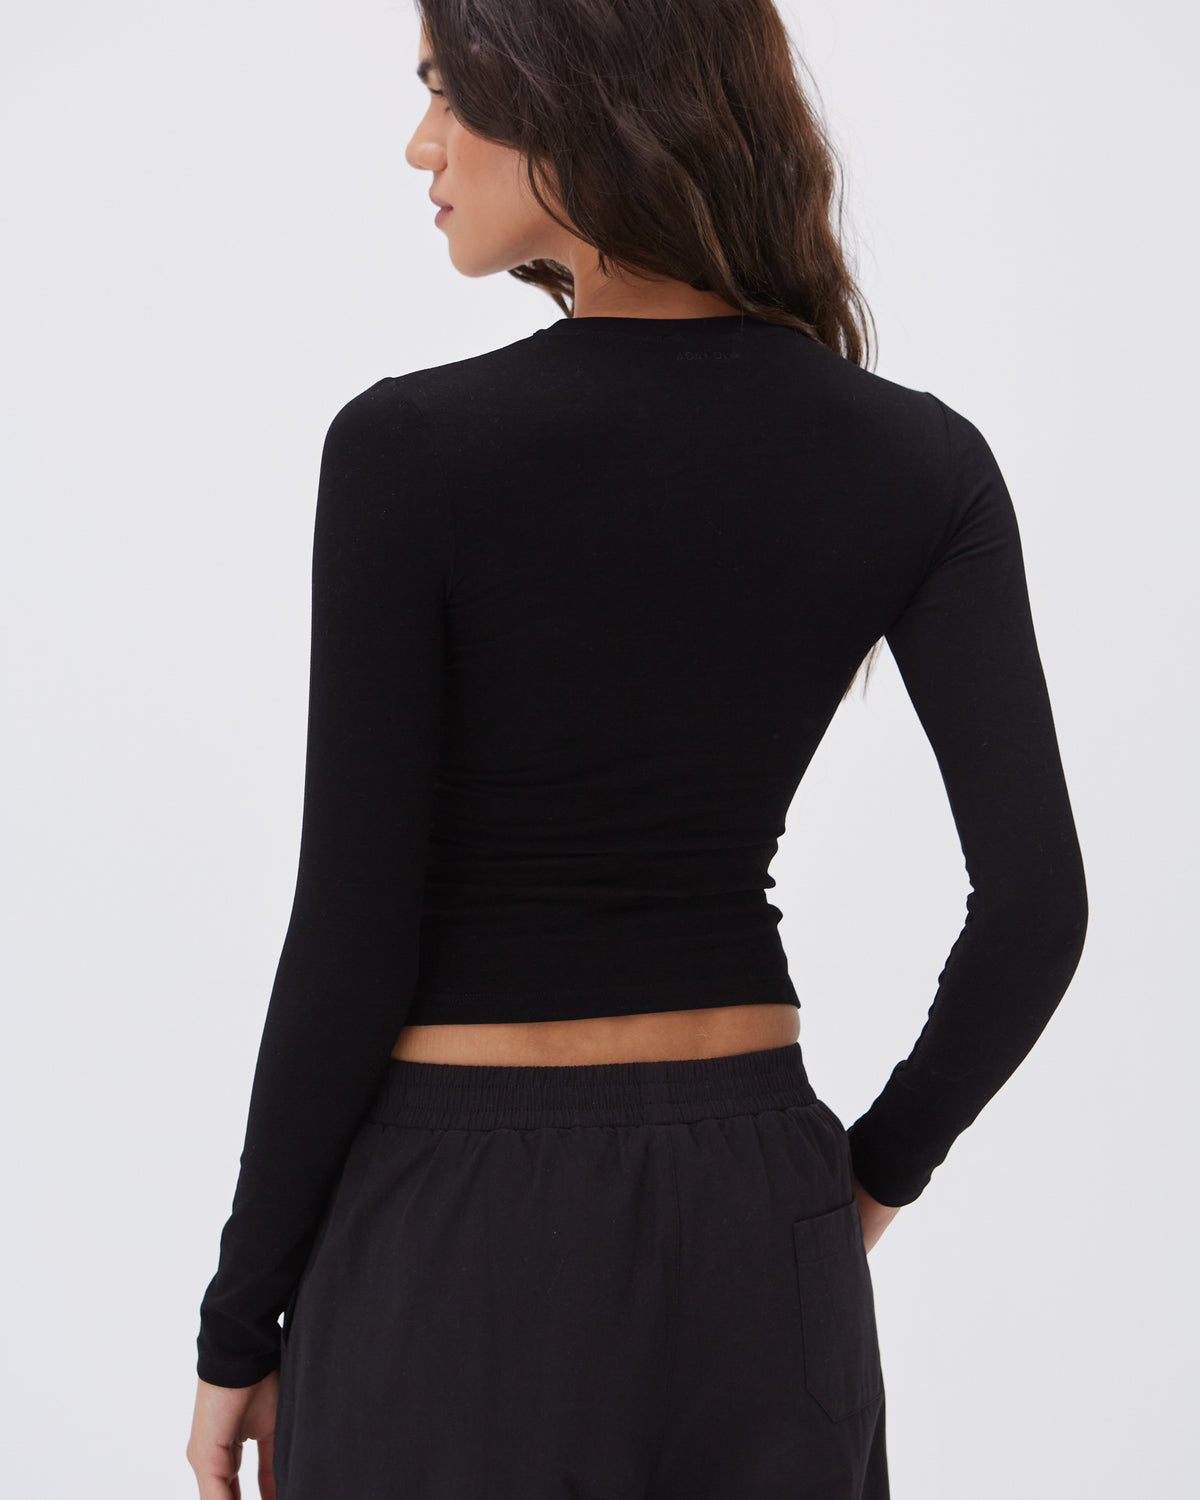 Women's Black Fitted Long Sleeve Top